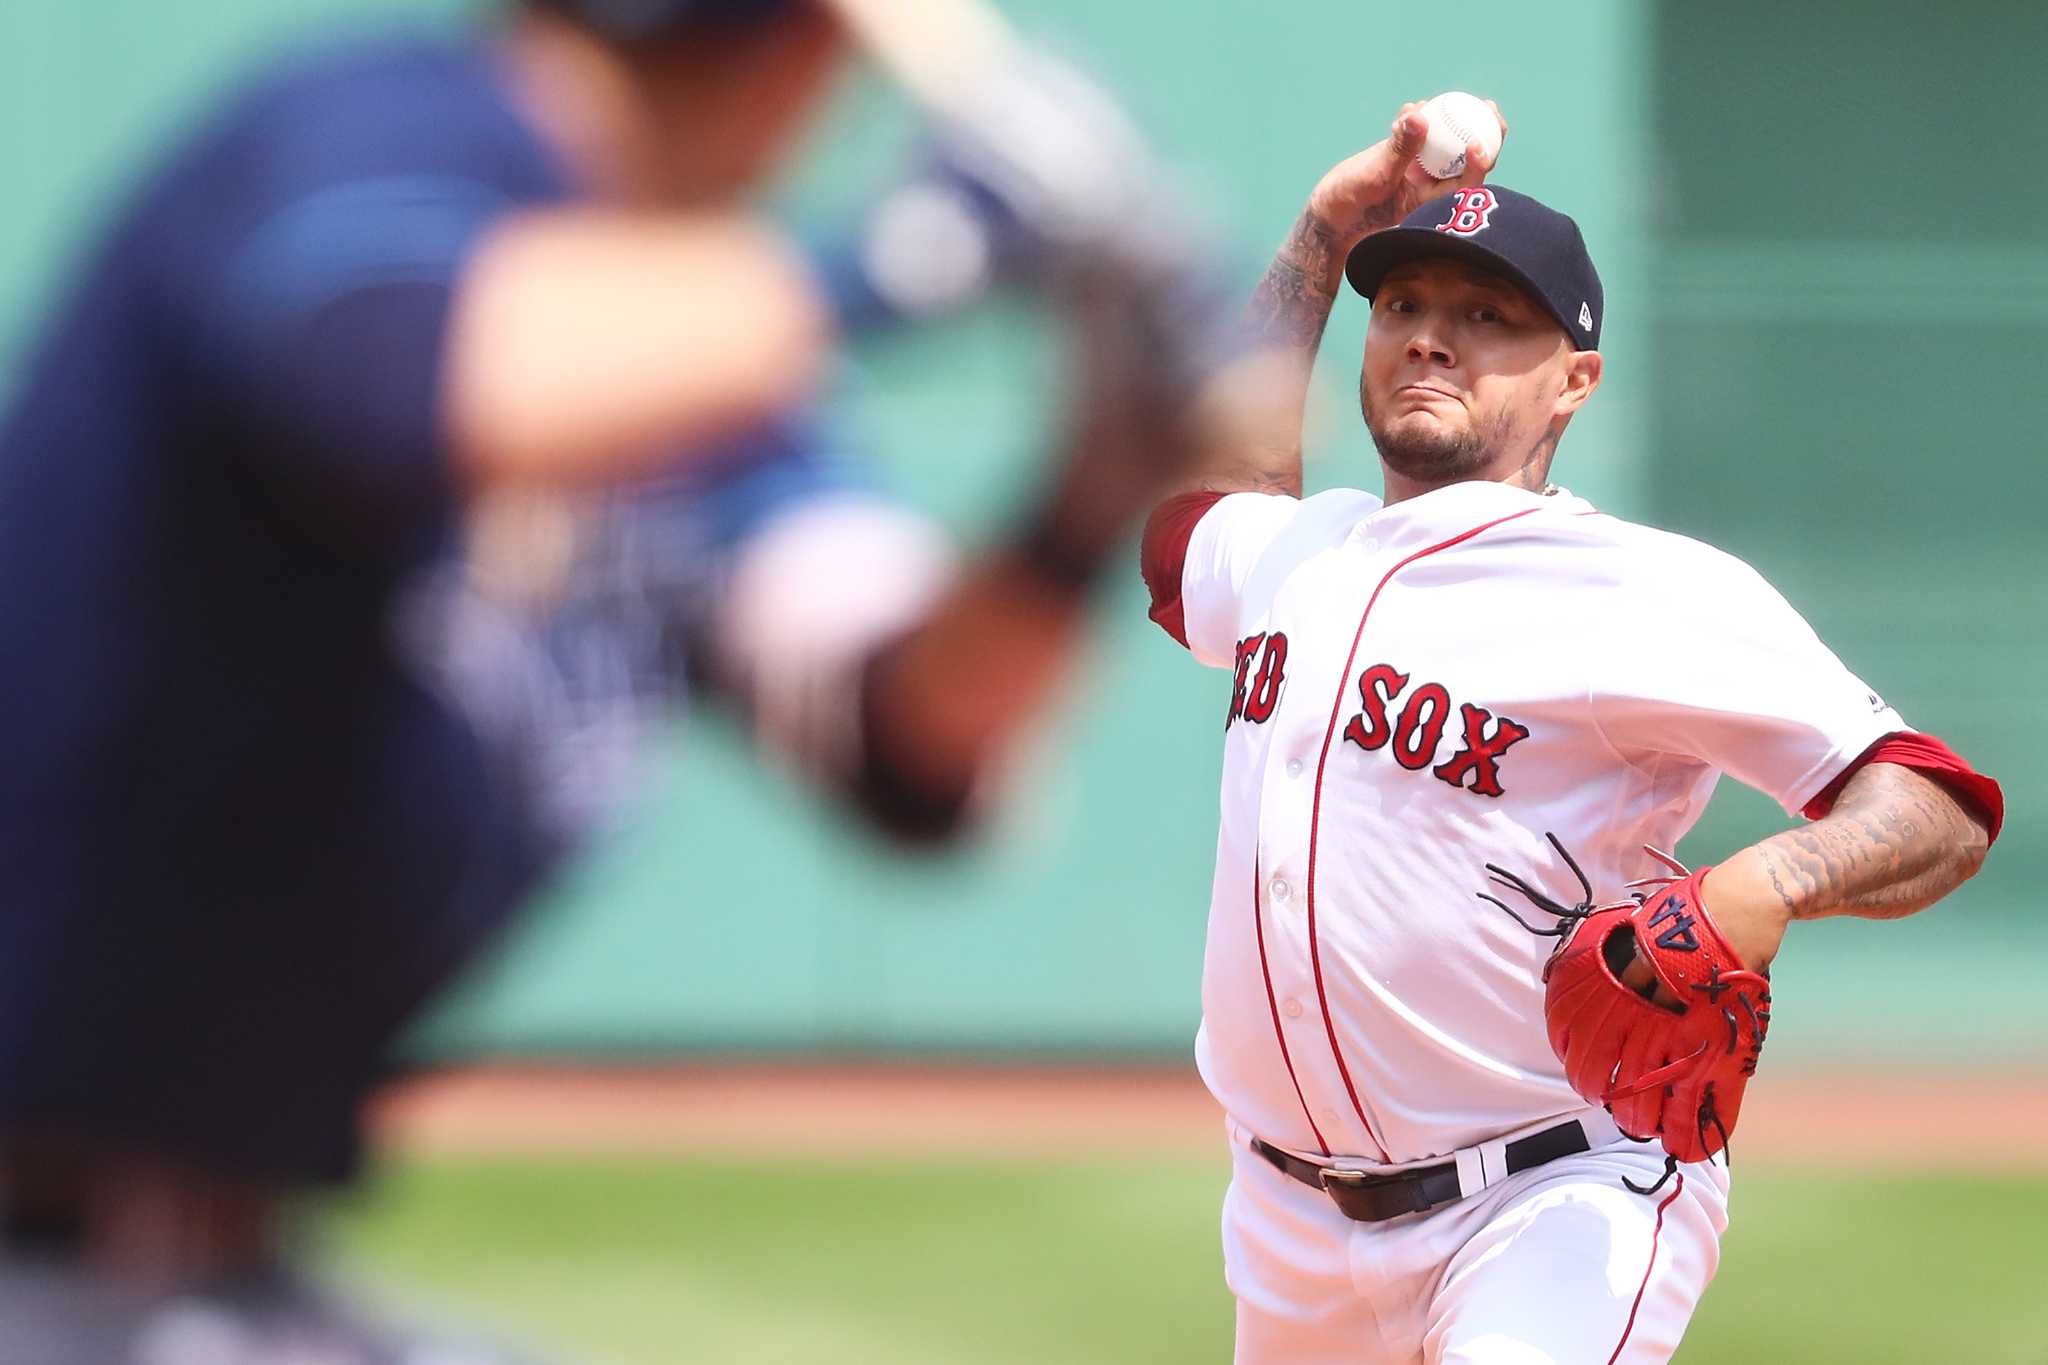 Jalen Beeks, former Boston Red Sox pitcher traded to Rays for